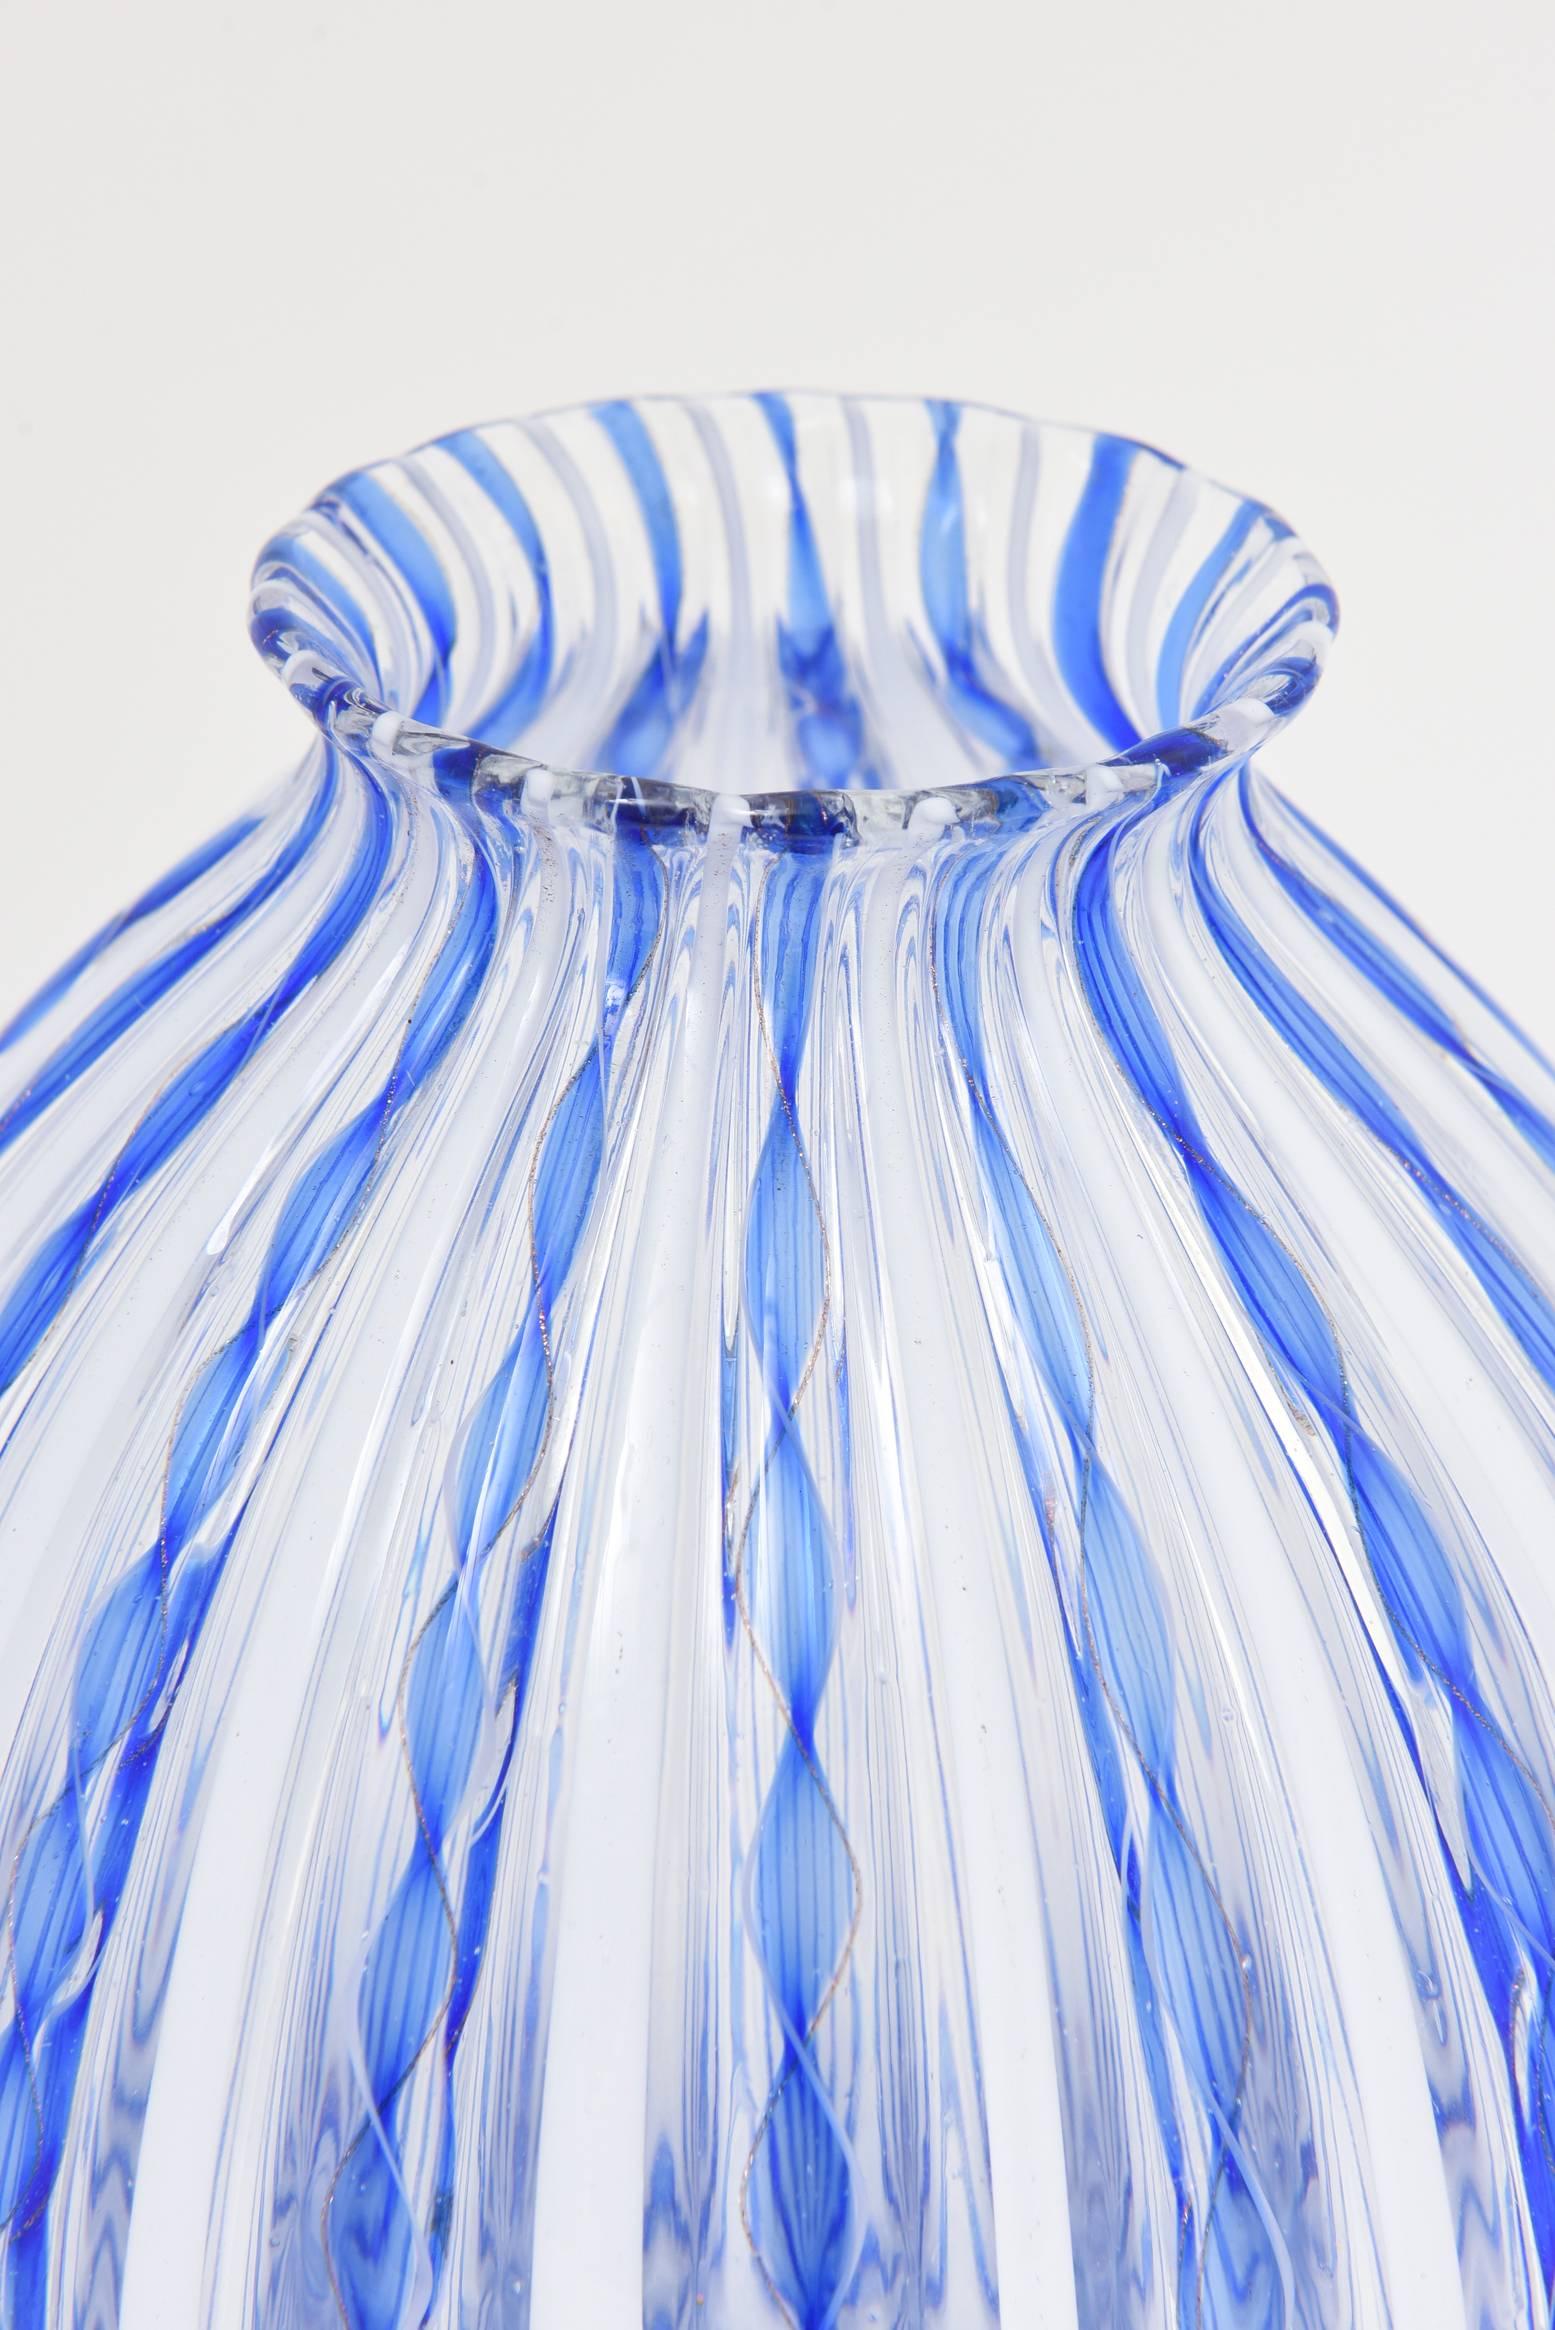 Mid-20th century, Murano art glass clear vase with blue twisted ribbon and solid white stripes.